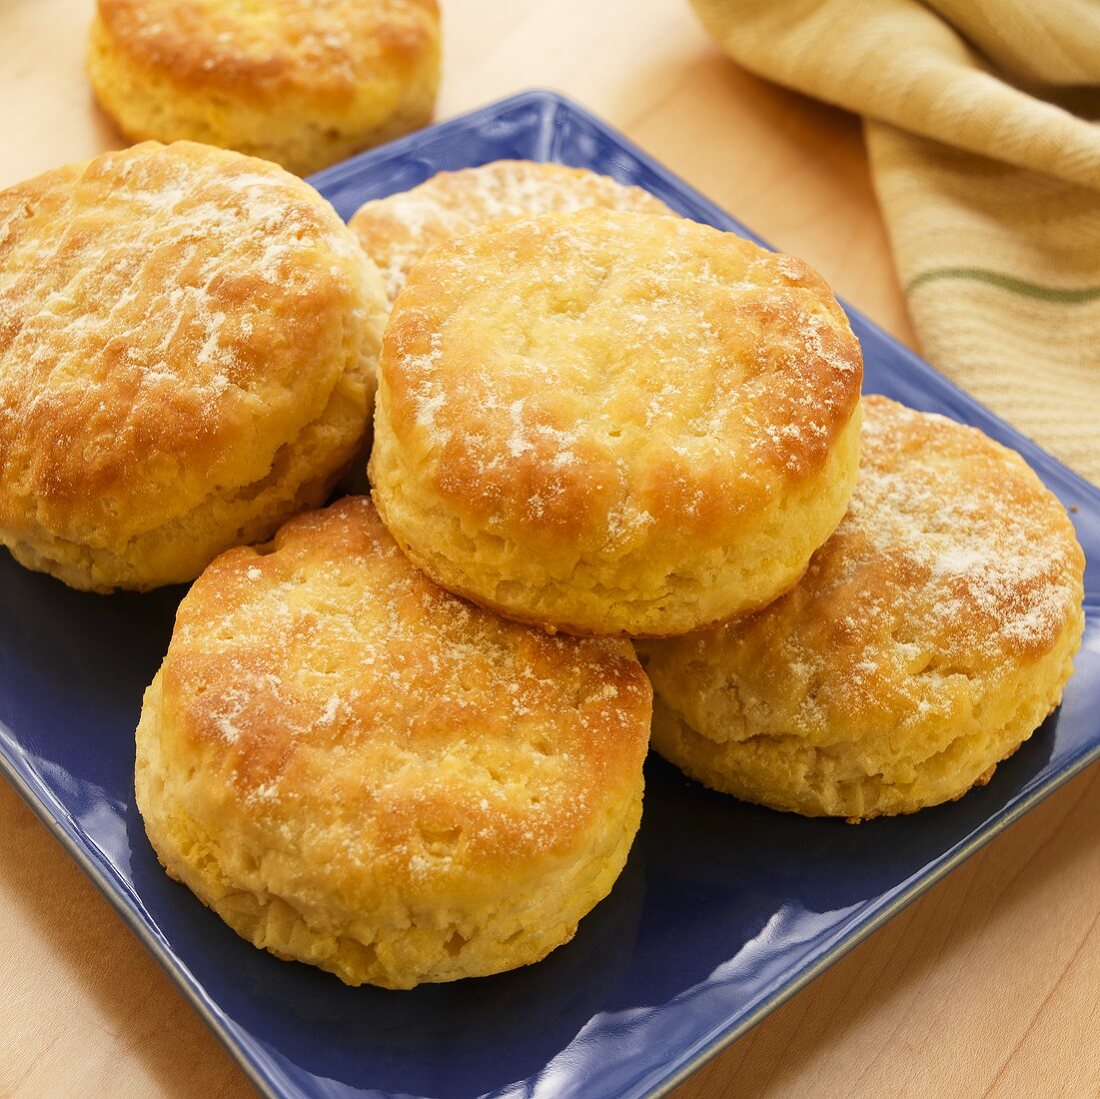 Buttermilk Biscuits on a Blue Plate